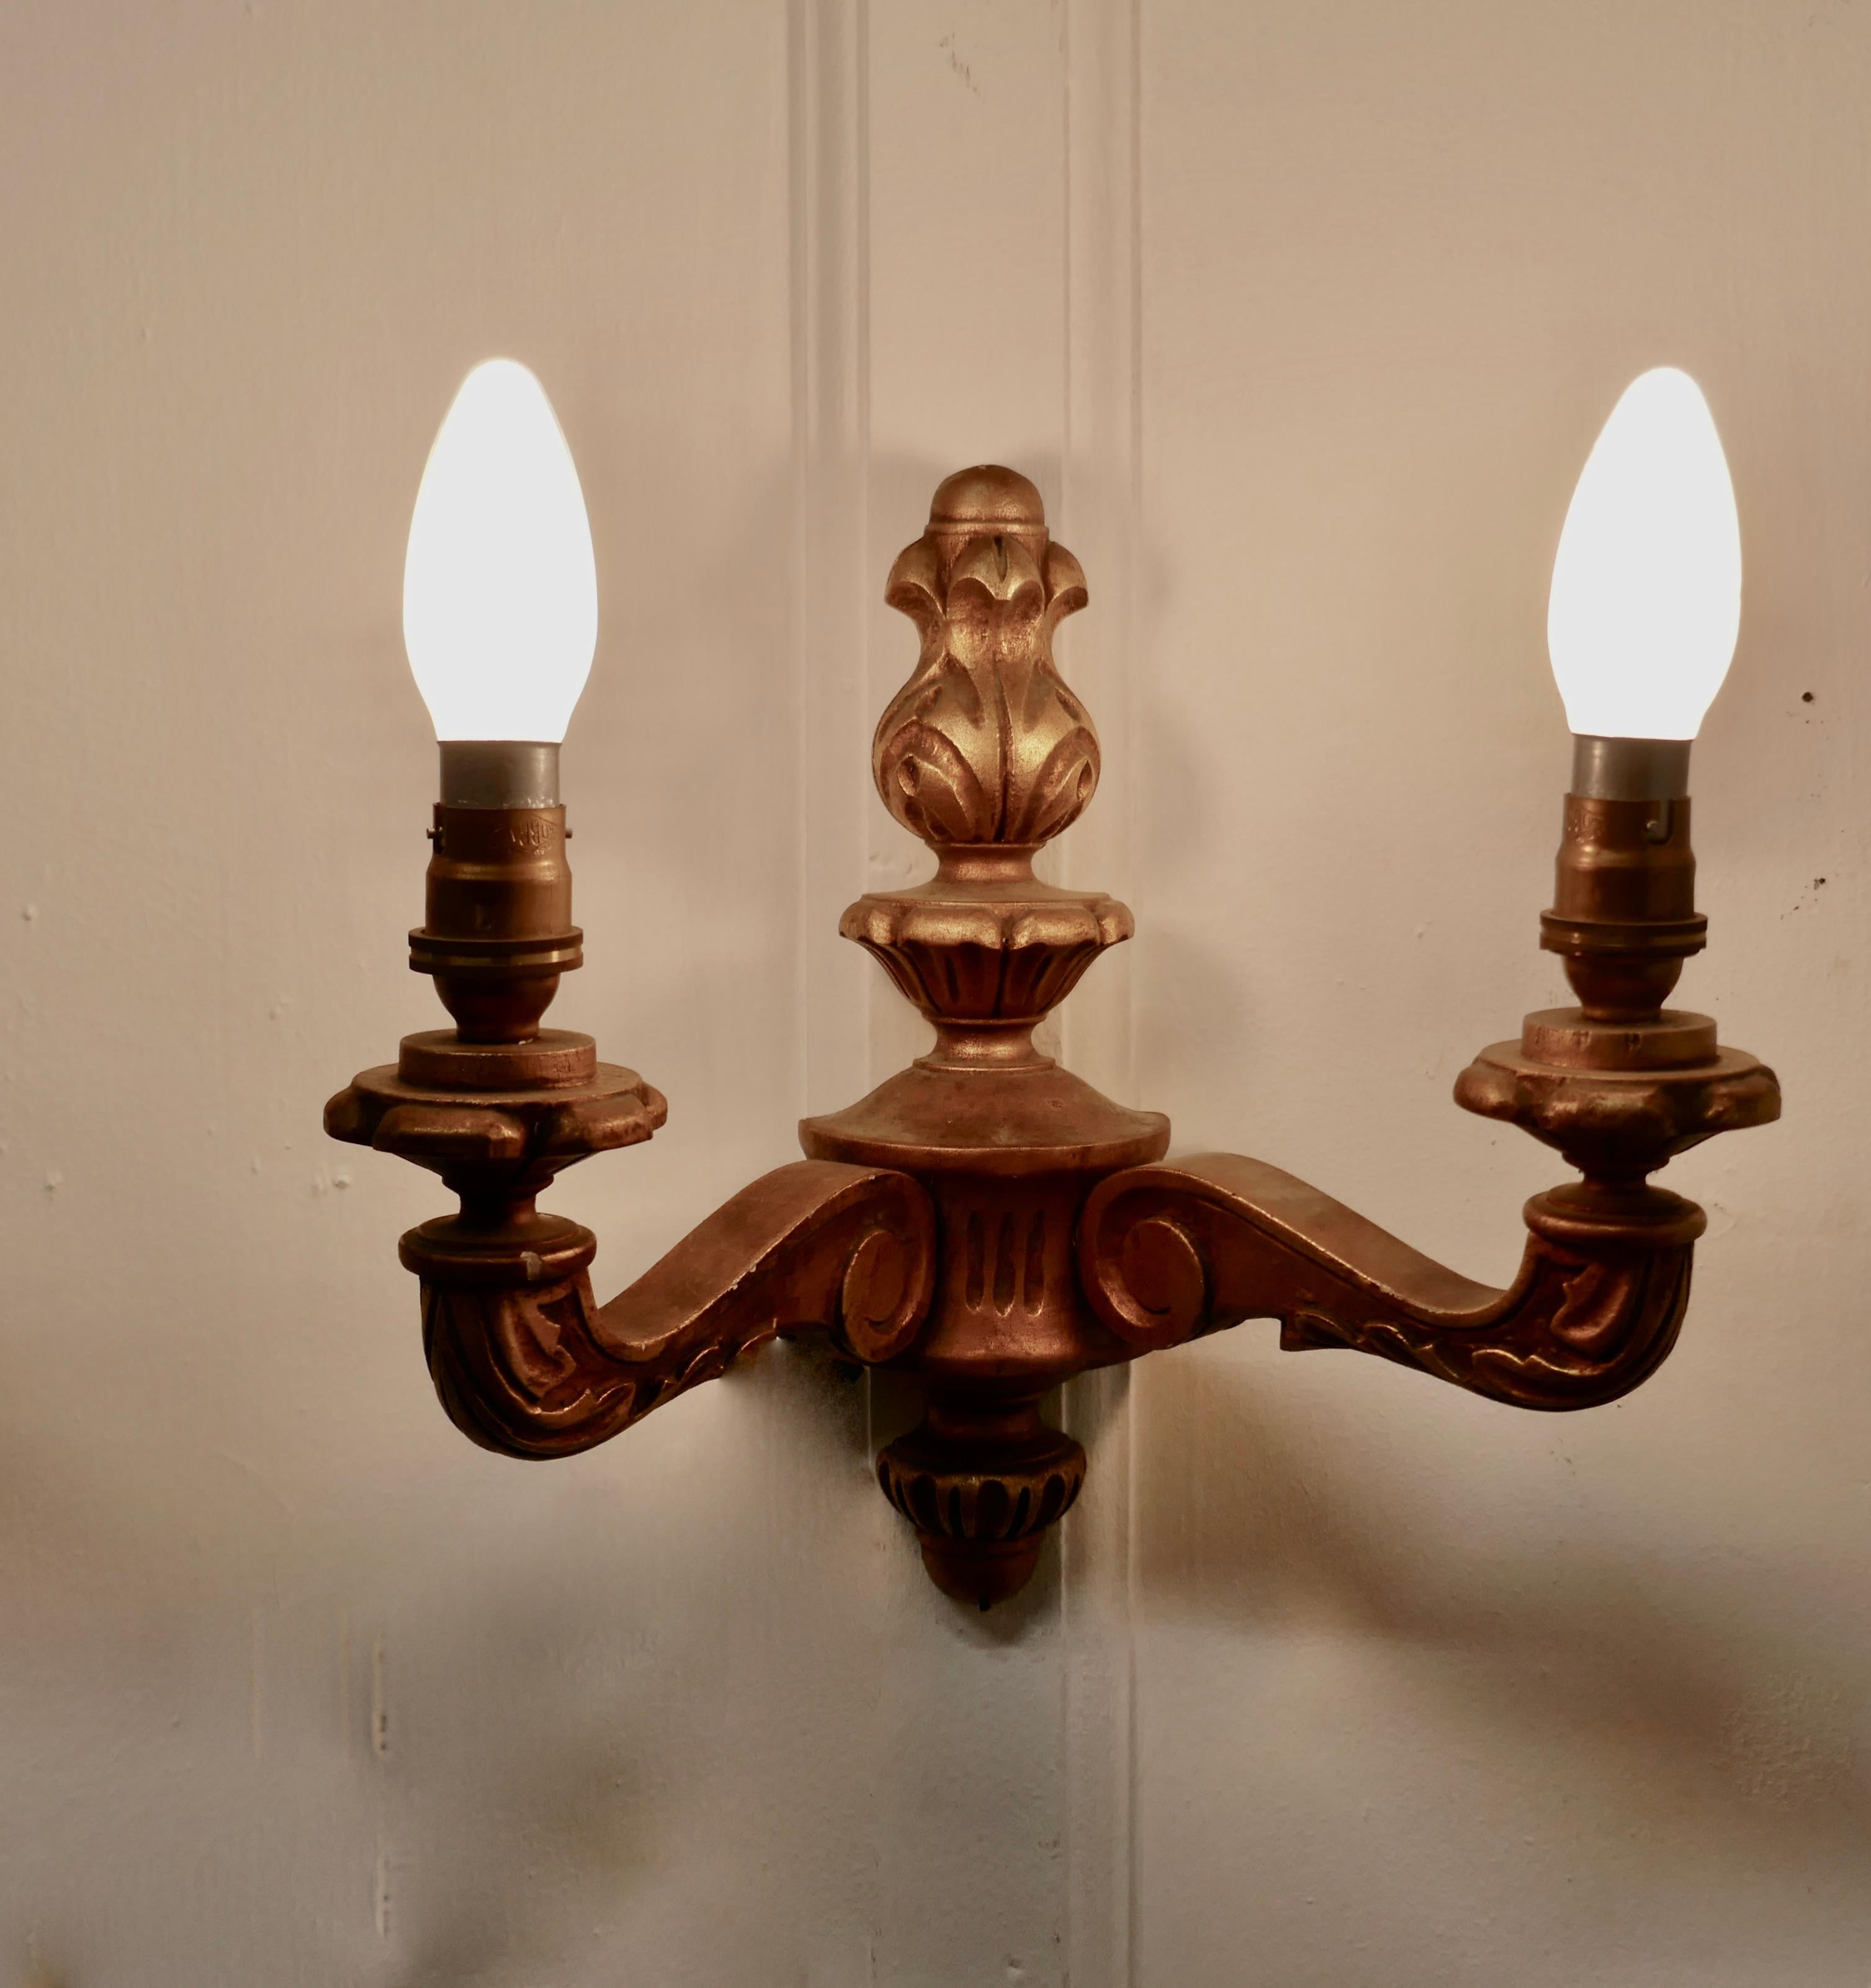 A set of 3 giltwood carved twin wall lights


This is a very attractive set of lights they each have 2 sconces 

The lights are in good vintage condition and working, however they will have to be installed by an electrician

The lights are